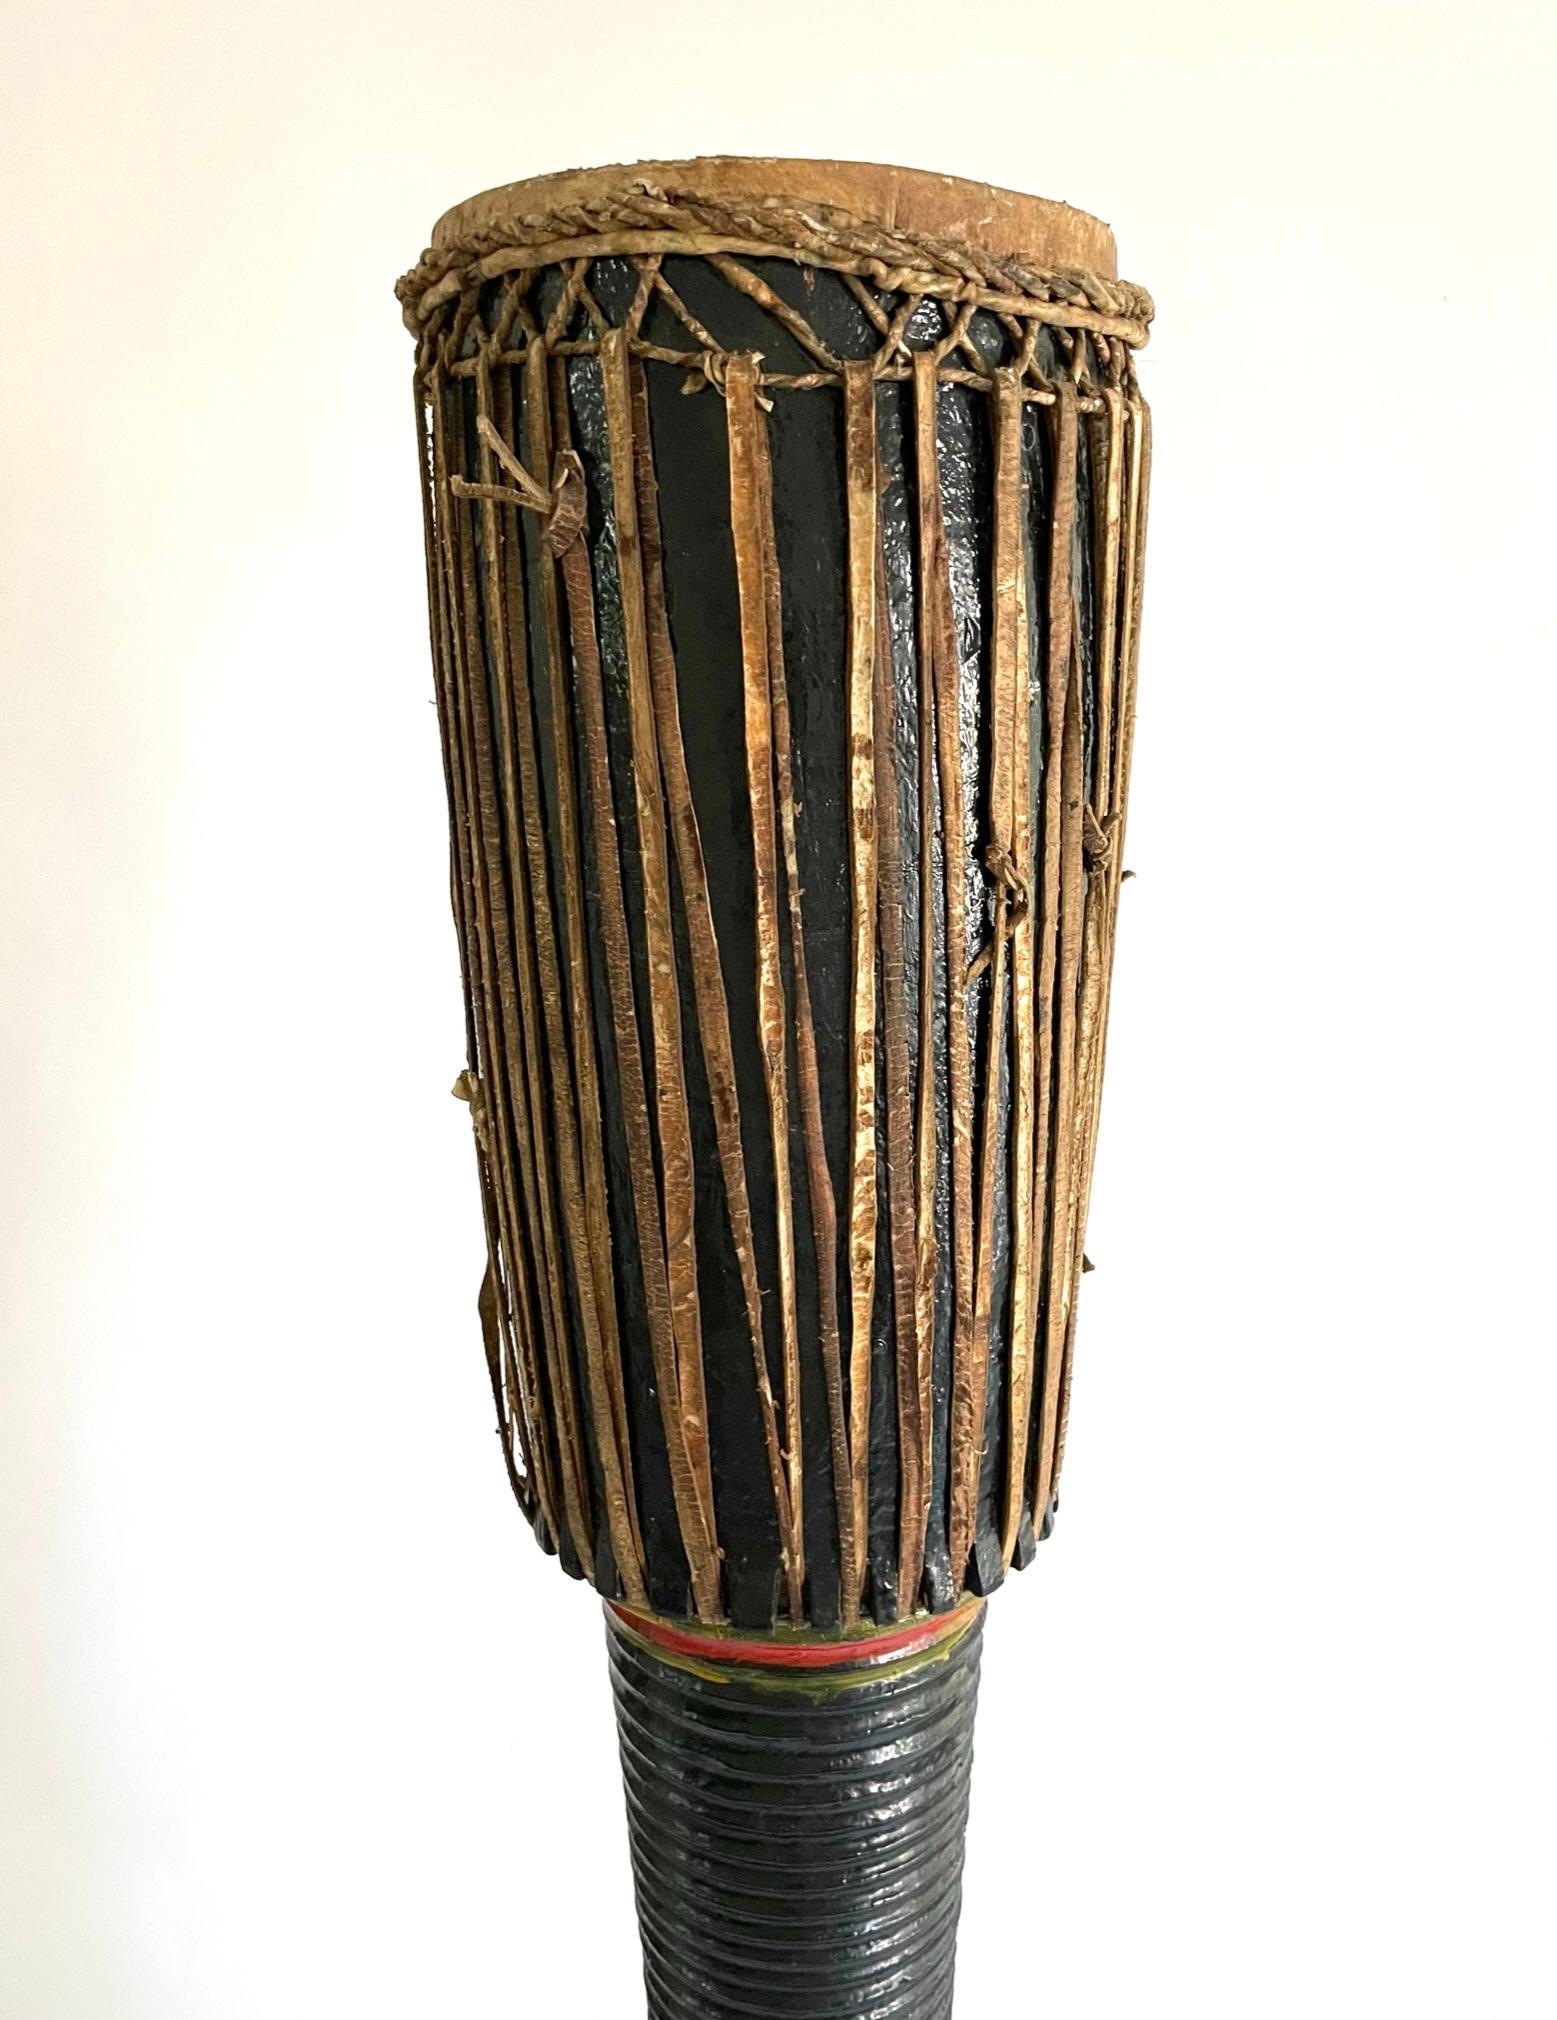 This elegantly carved temple drum wase use in Buddhist Temples. It’s carved from teak and lacquered black with red and green stripped details. The top and straps are made of leather. These gigantic goblet drums were used principally in Buddhist